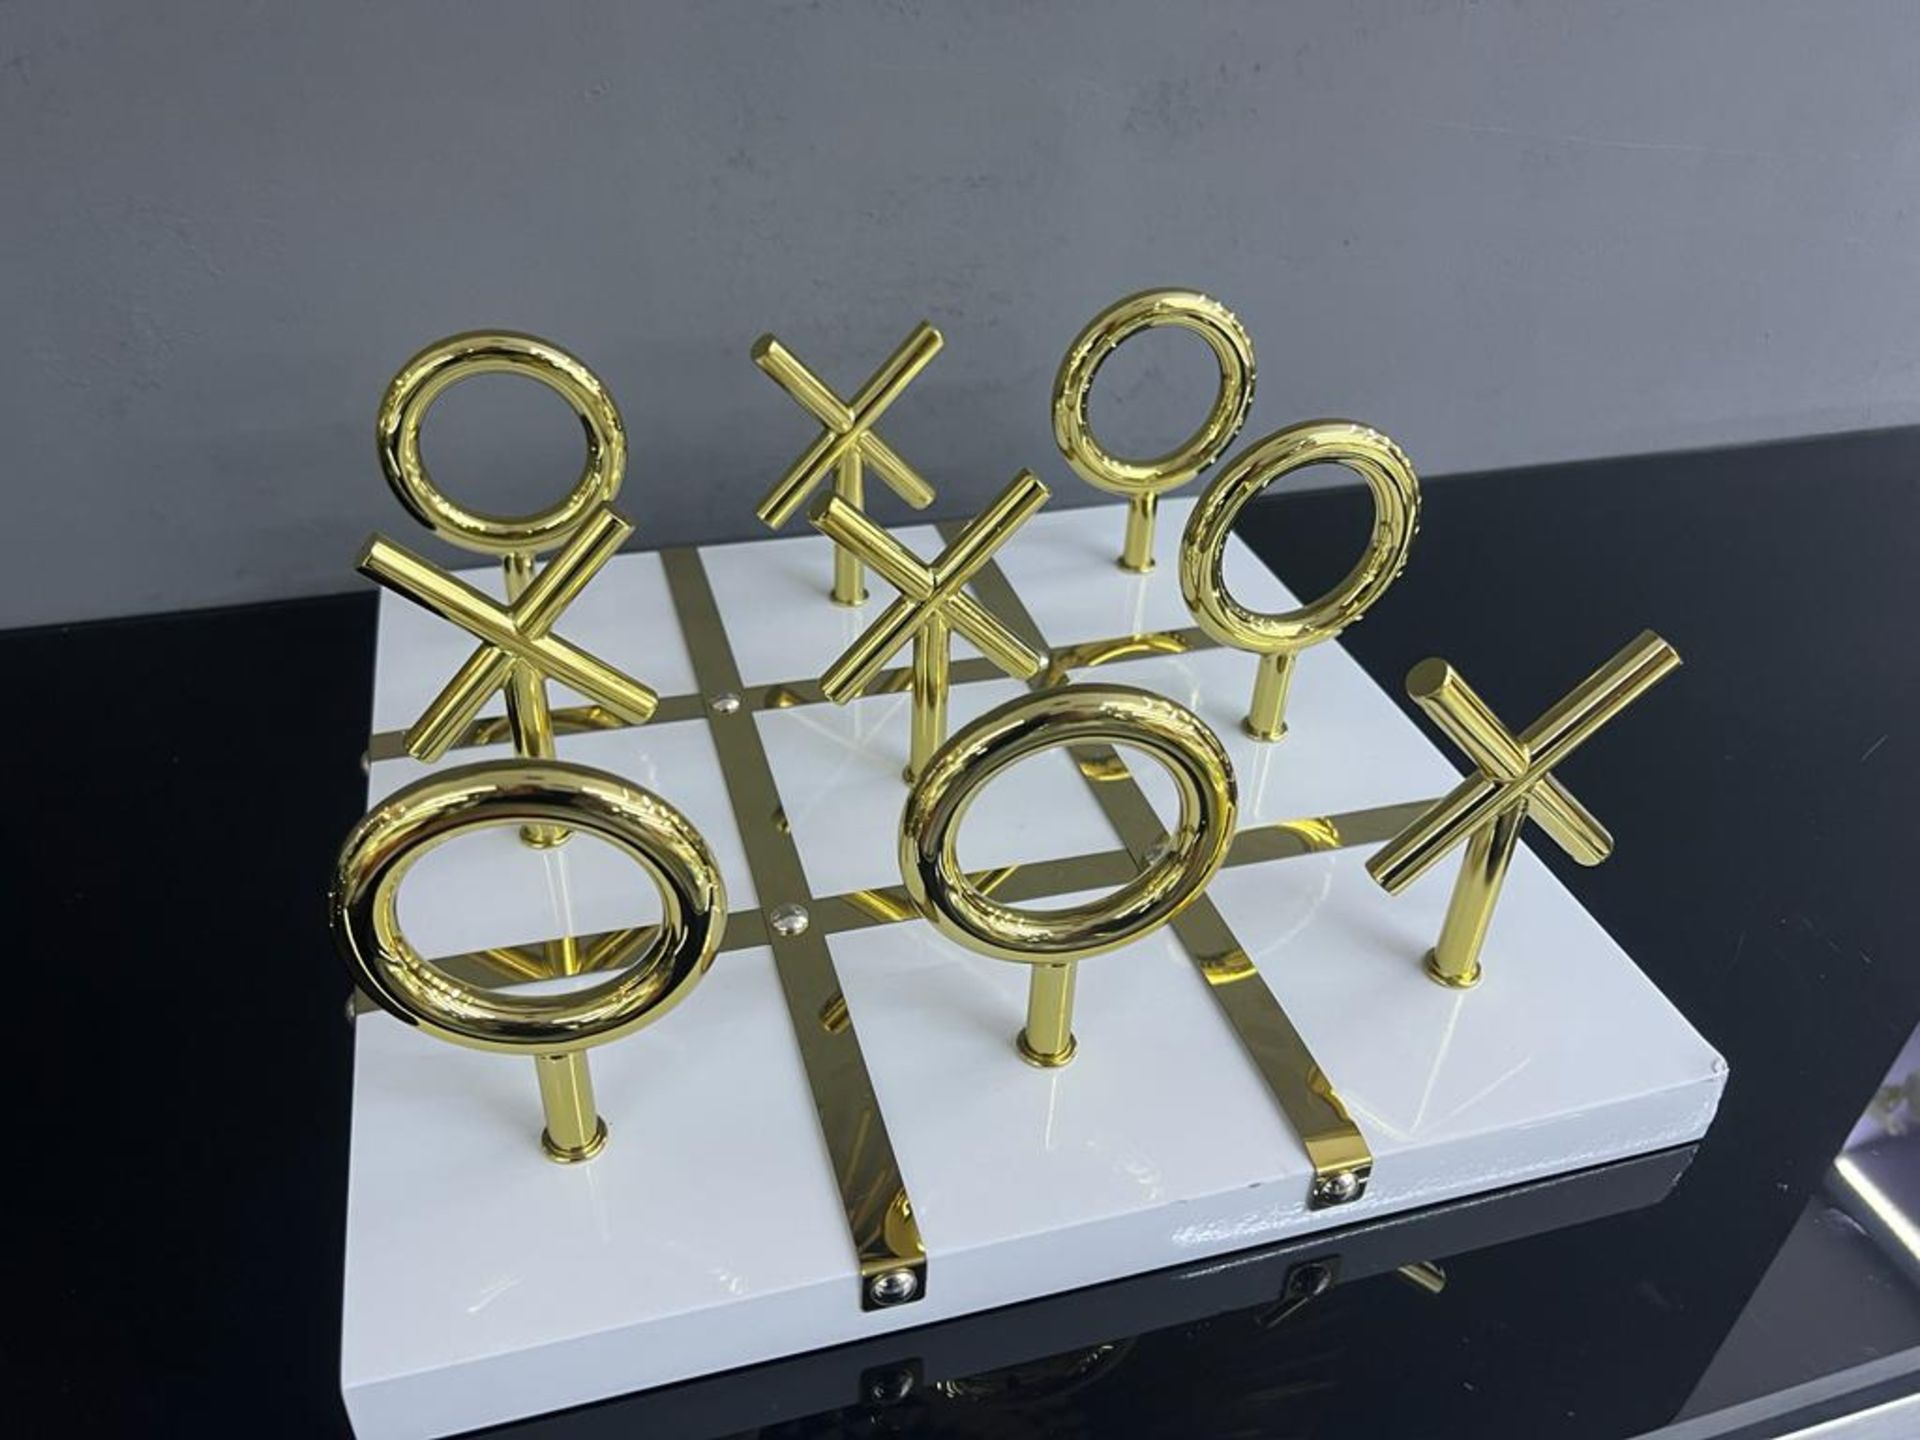 New Boxed Quality White And Gold Standing Noughts And Crosses Game Set - Image 2 of 3